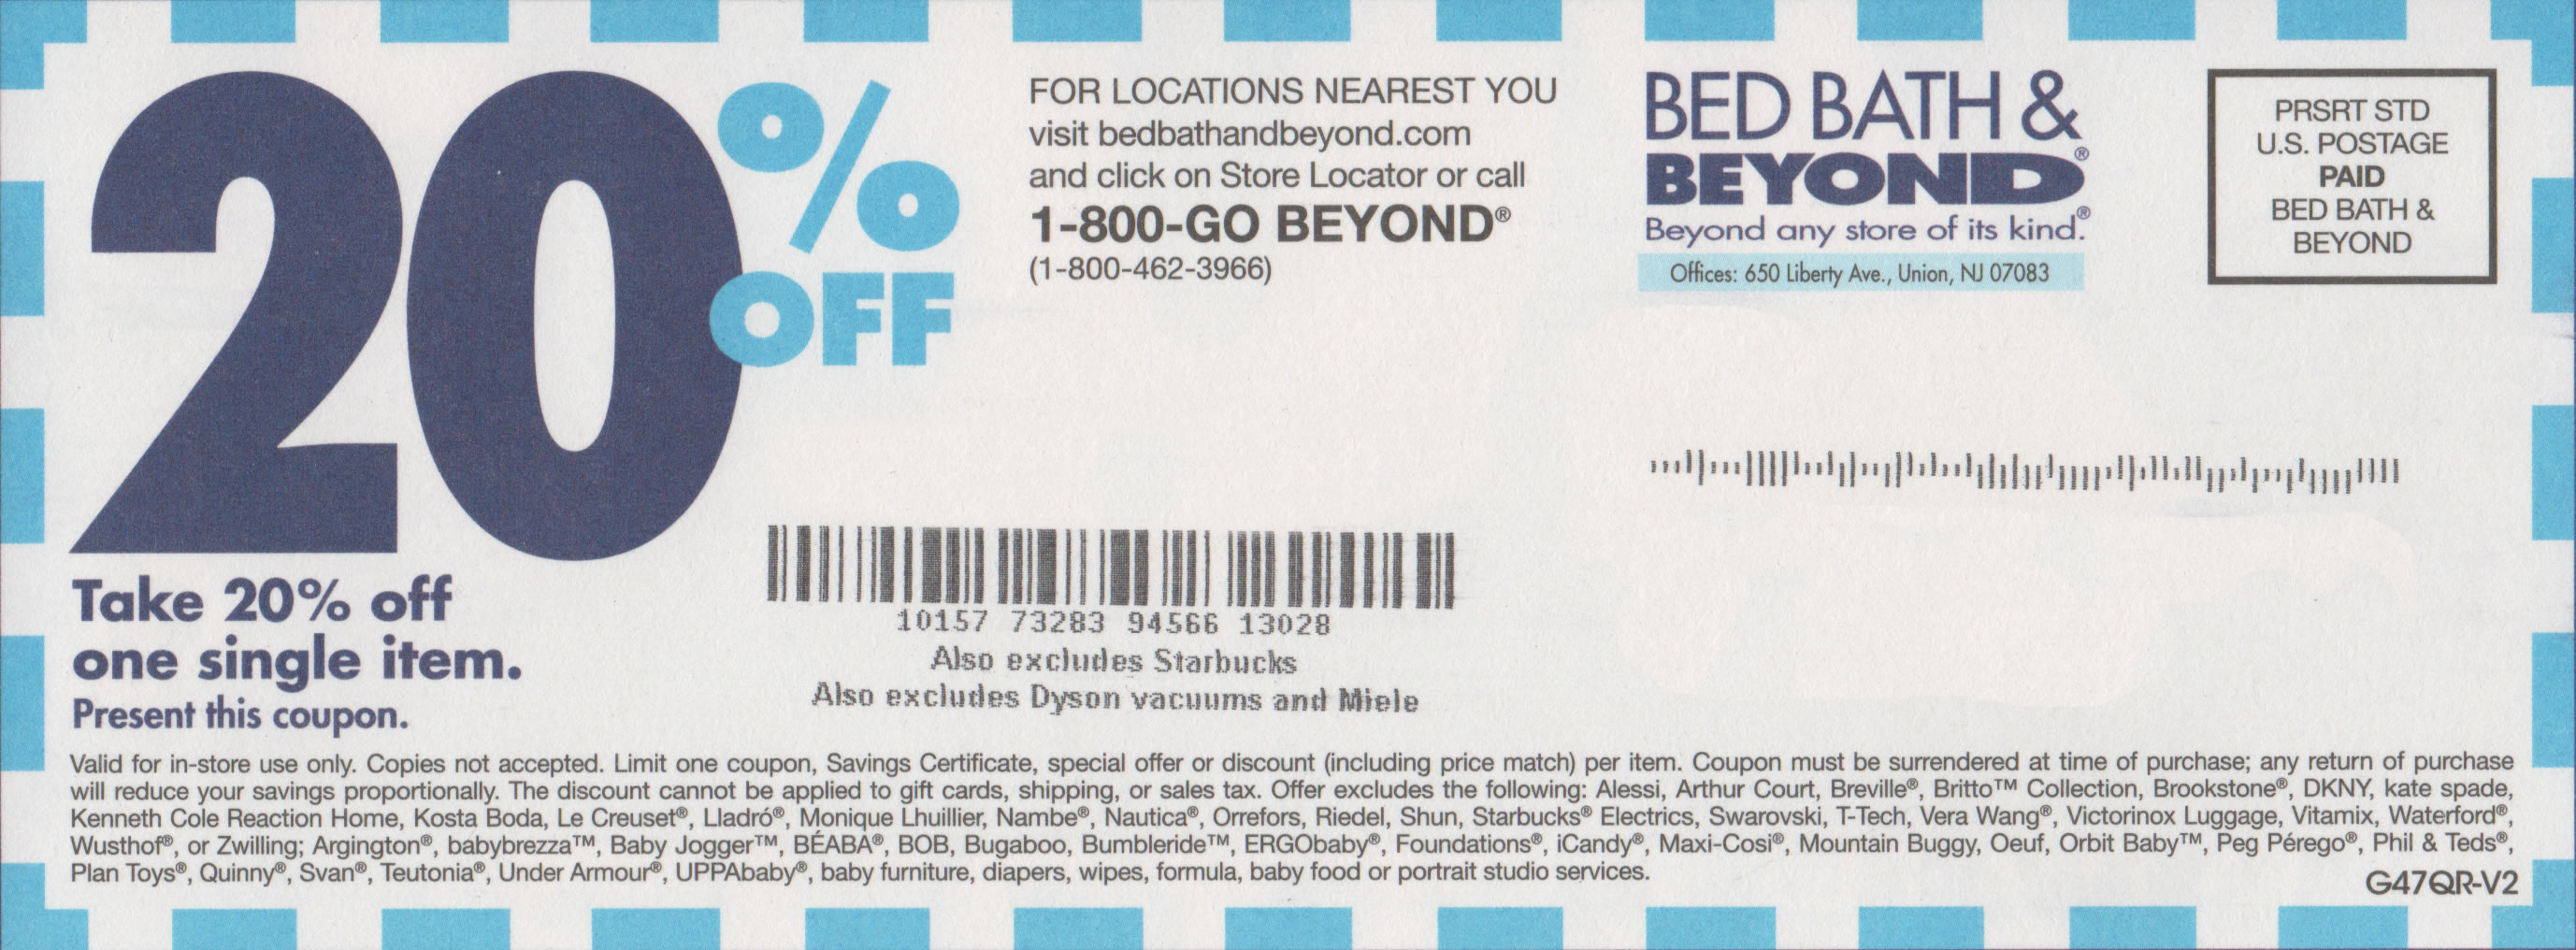 Which bed bath and beyond coupon gives you the best saving?